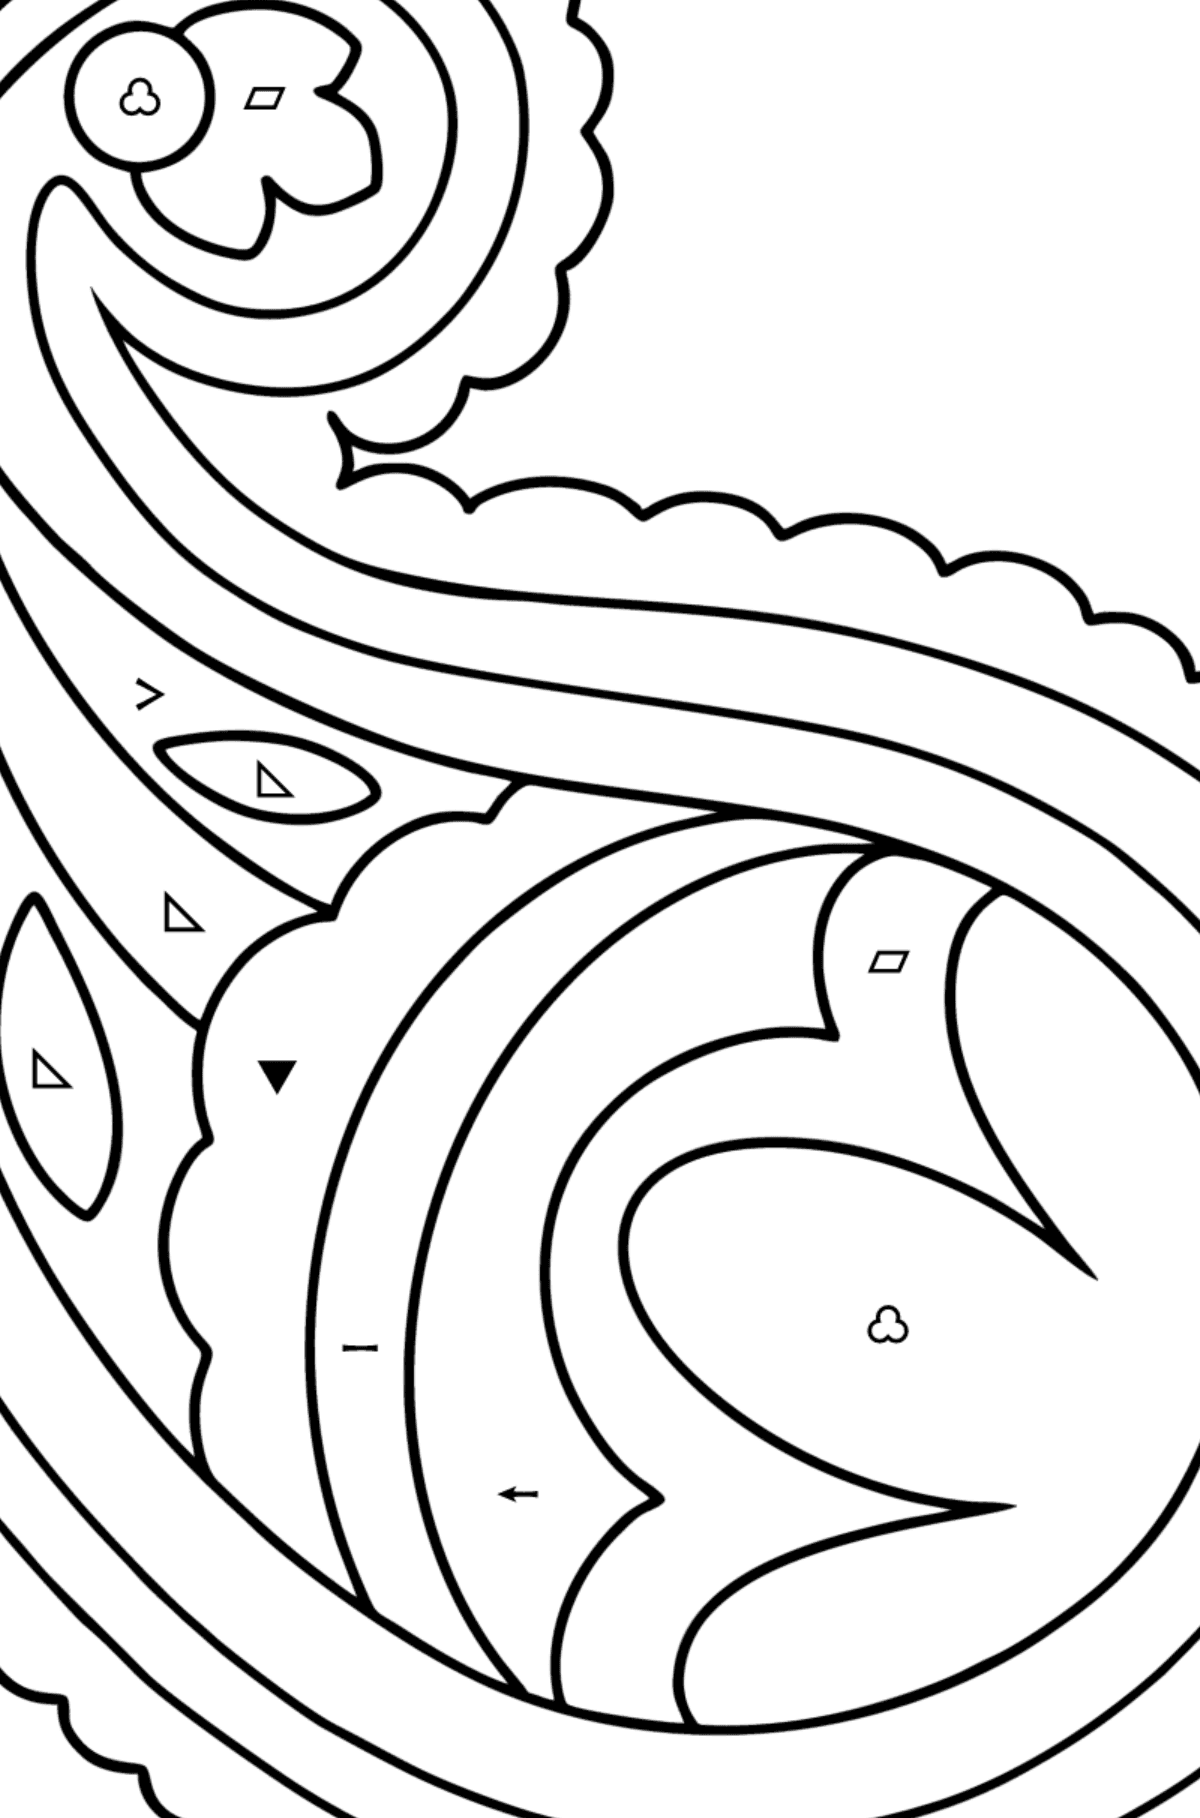 Paisley coloring page - 16 Elements - Coloring by Symbols and Geometric Shapes for Kids